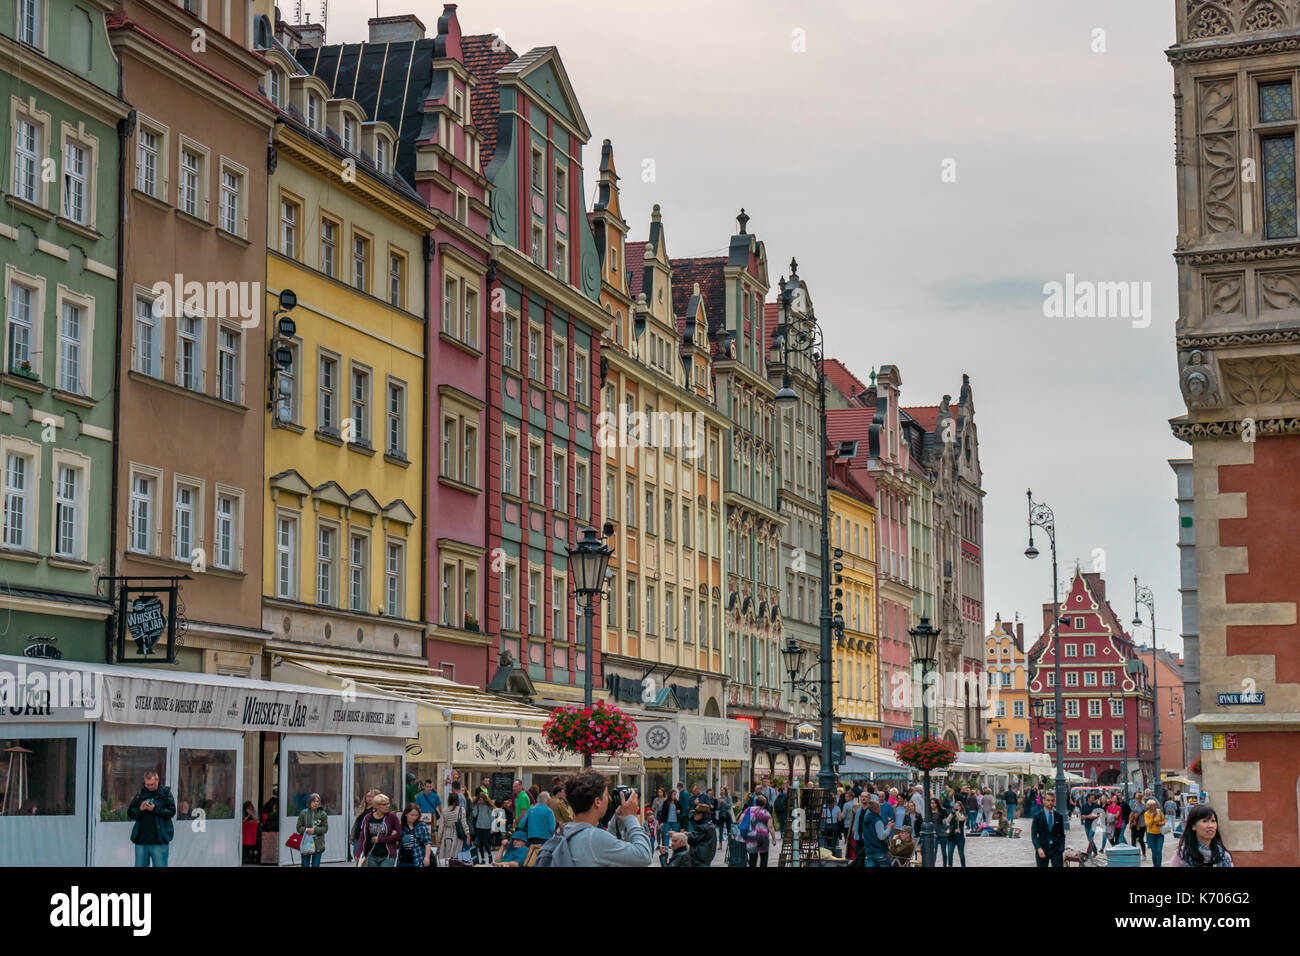 The Market Square (Rynek) in Wroclaw in 2017, Poland Stock Photo